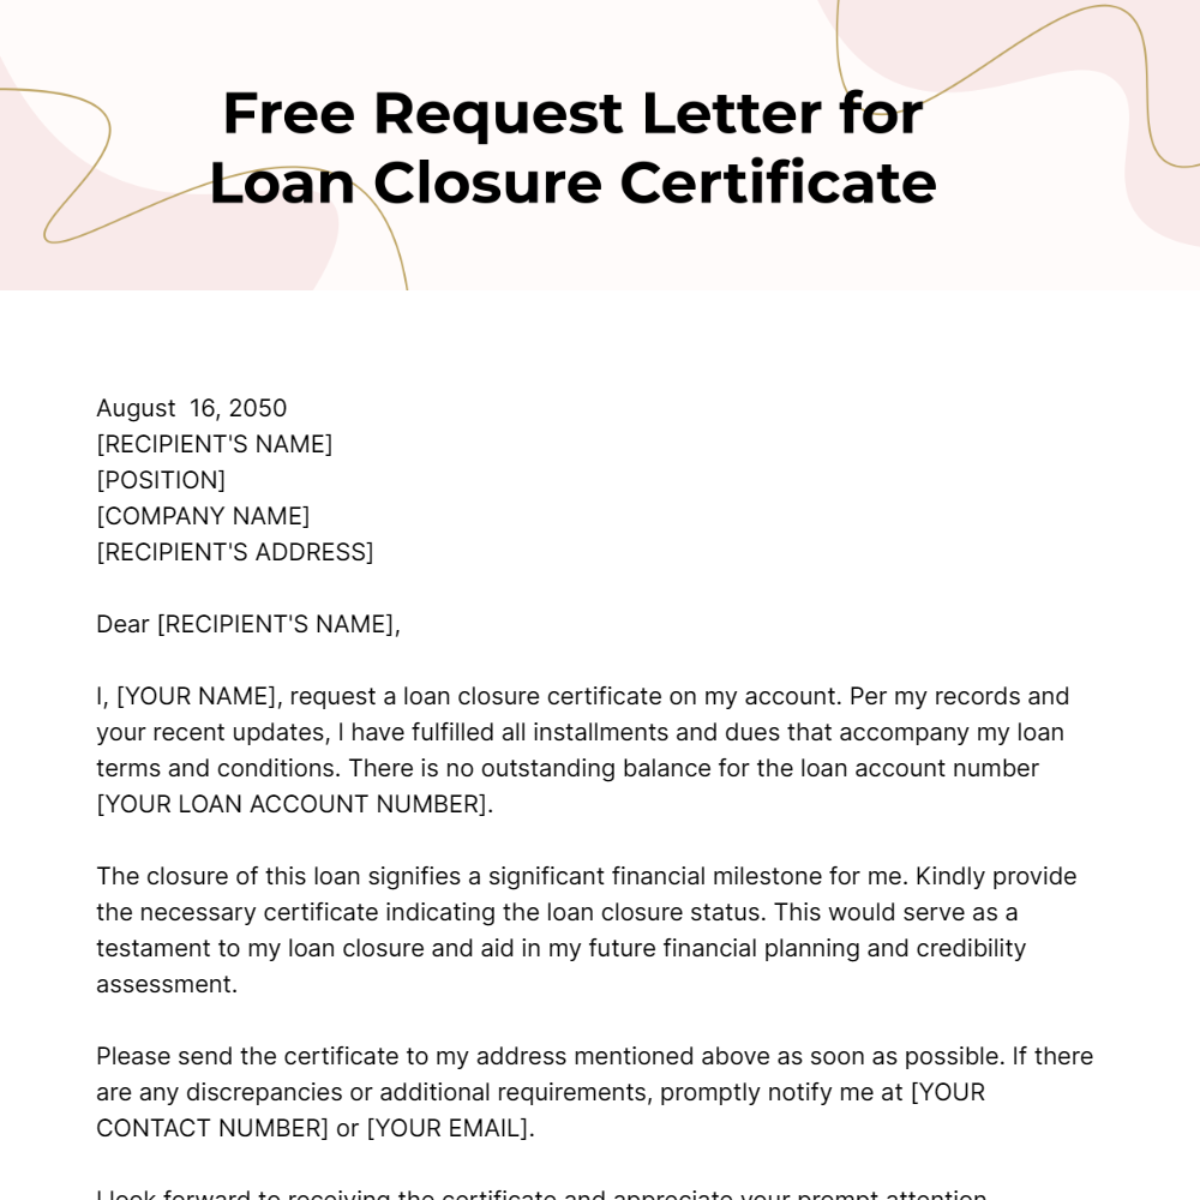 Request Letter for Loan Closure Certificate Template